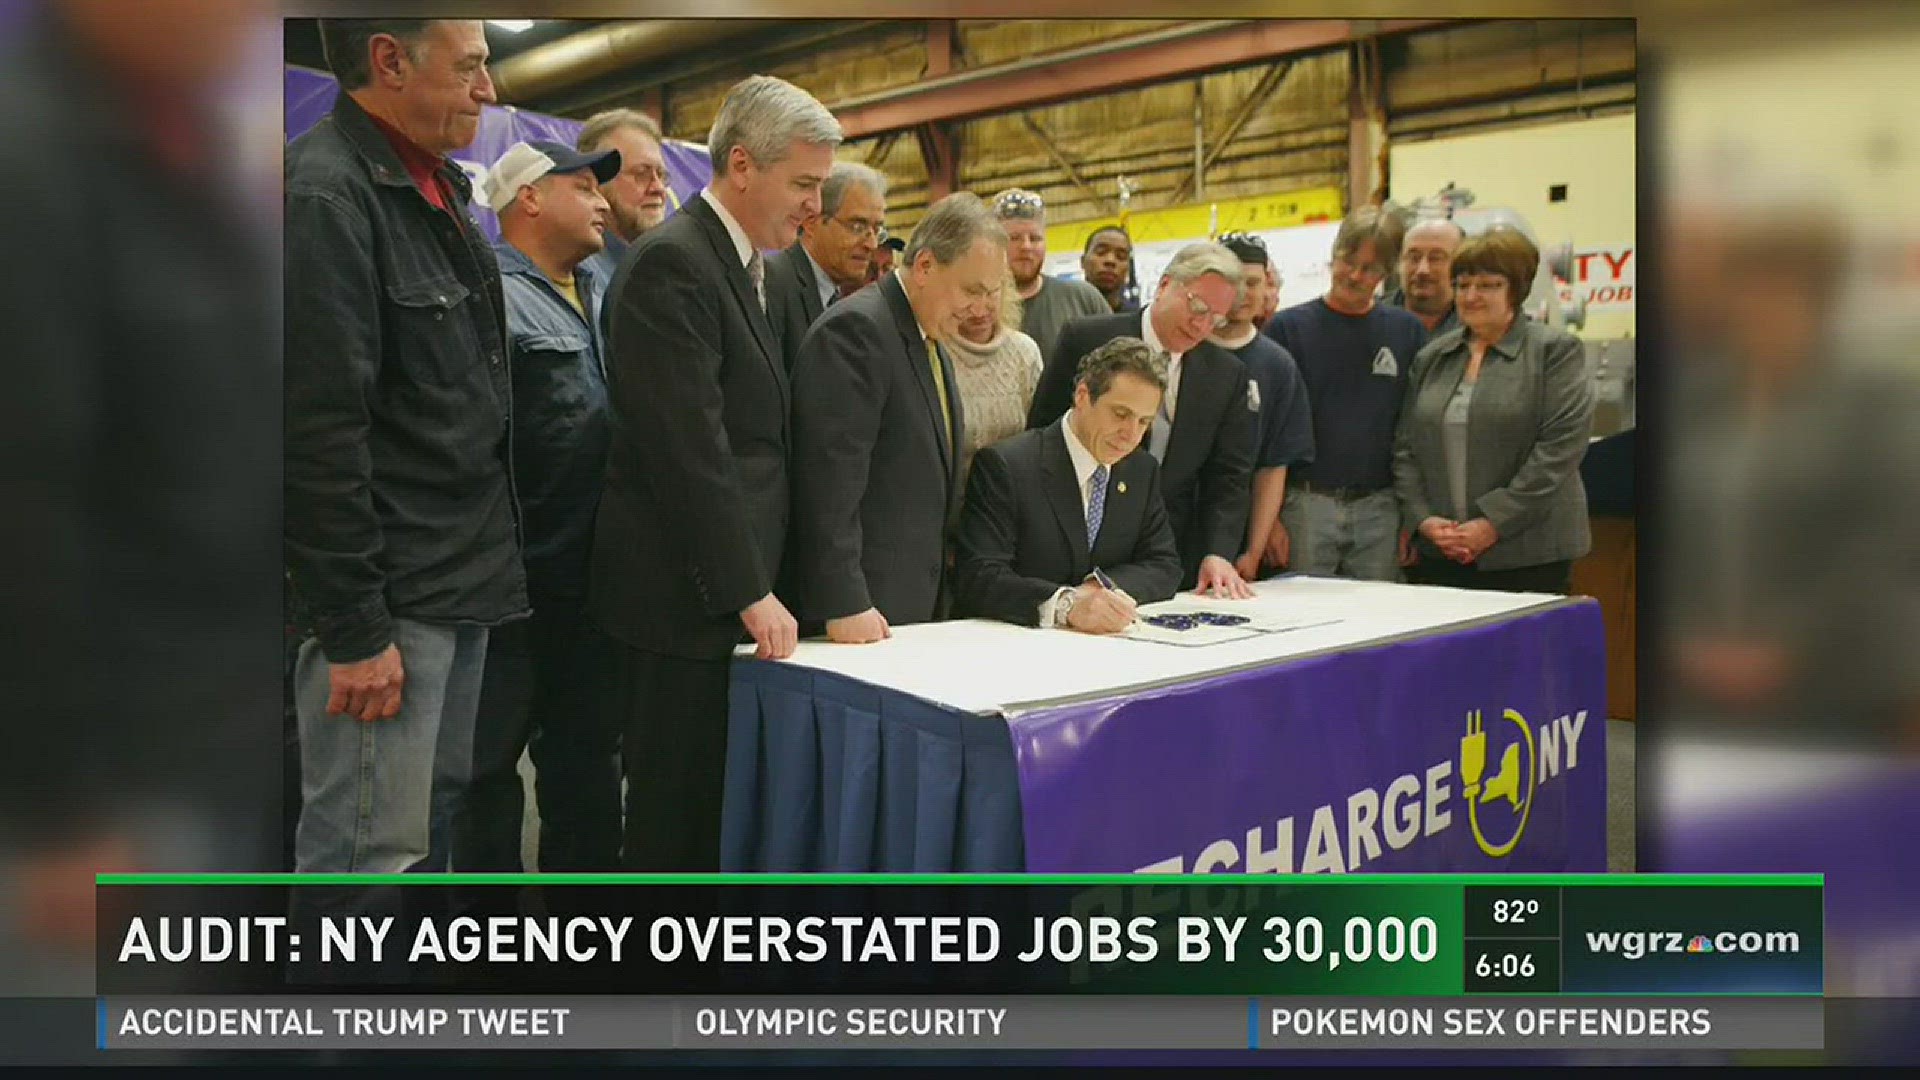 Audit: NY agency overstated jobs by 30,000